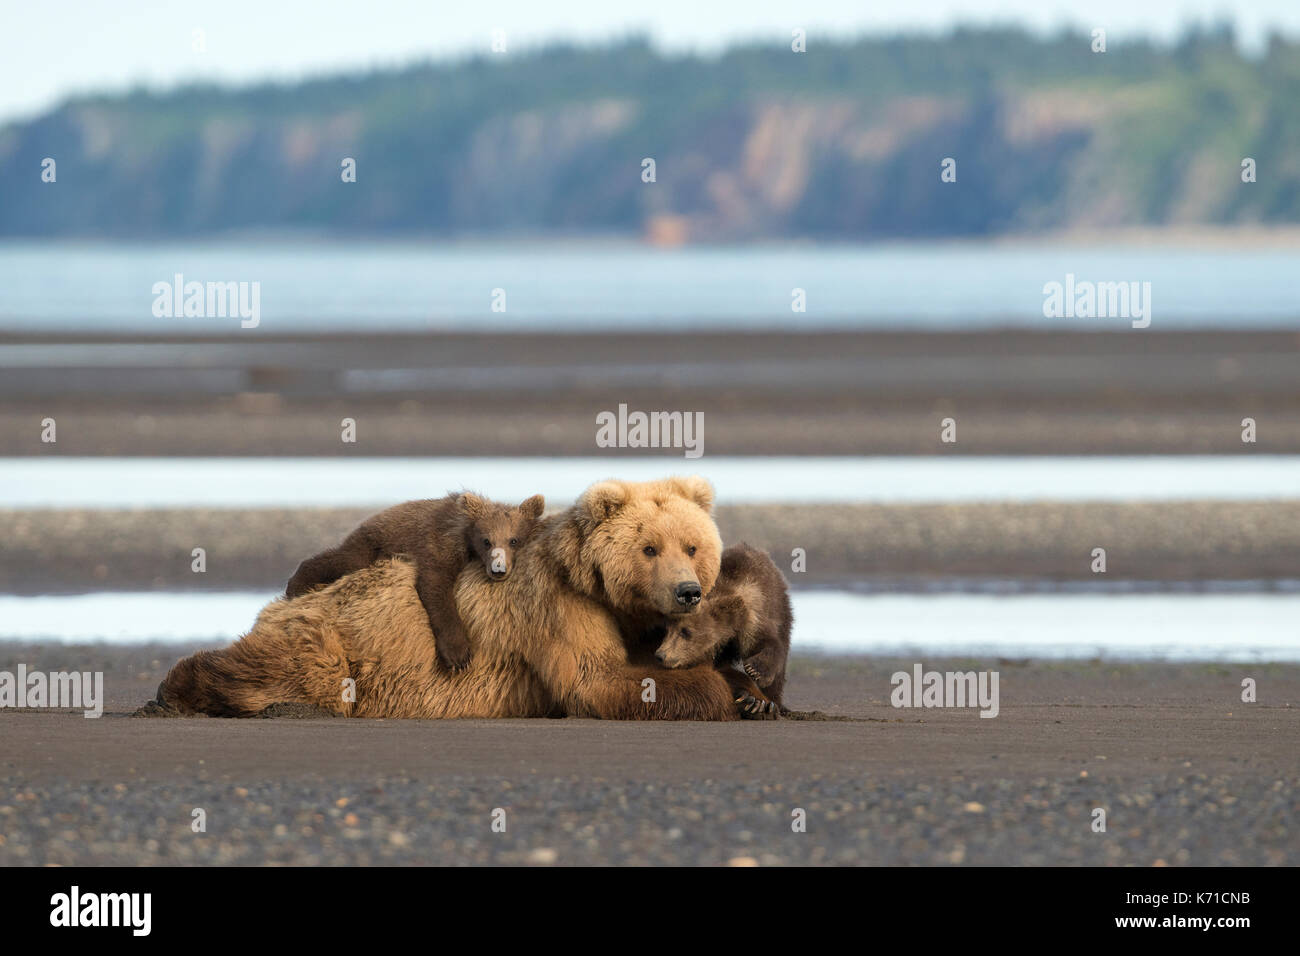 Brown bear sow and cubs snuggling Stock Photo